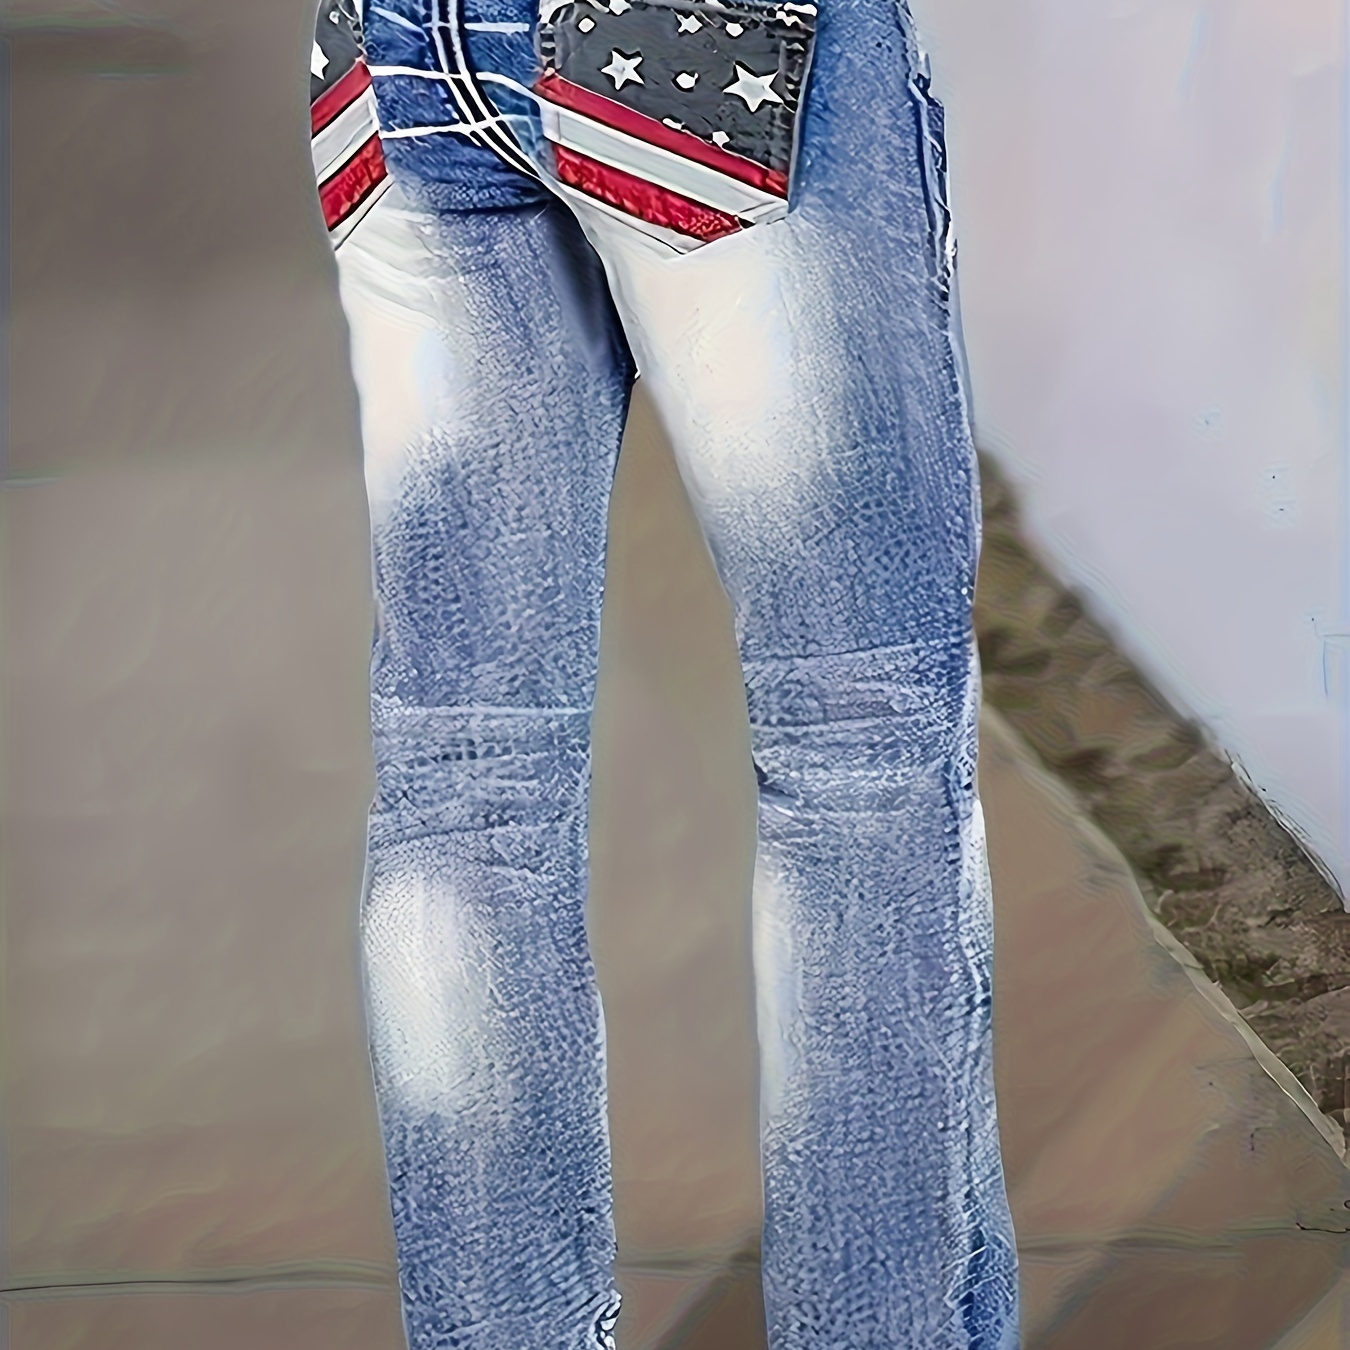 

Women's Casual Bootcut Jeans With Star Striped Flag Pattern And Distressed Pocket Detail, Stretch Denim, Independence Day 4th Of July